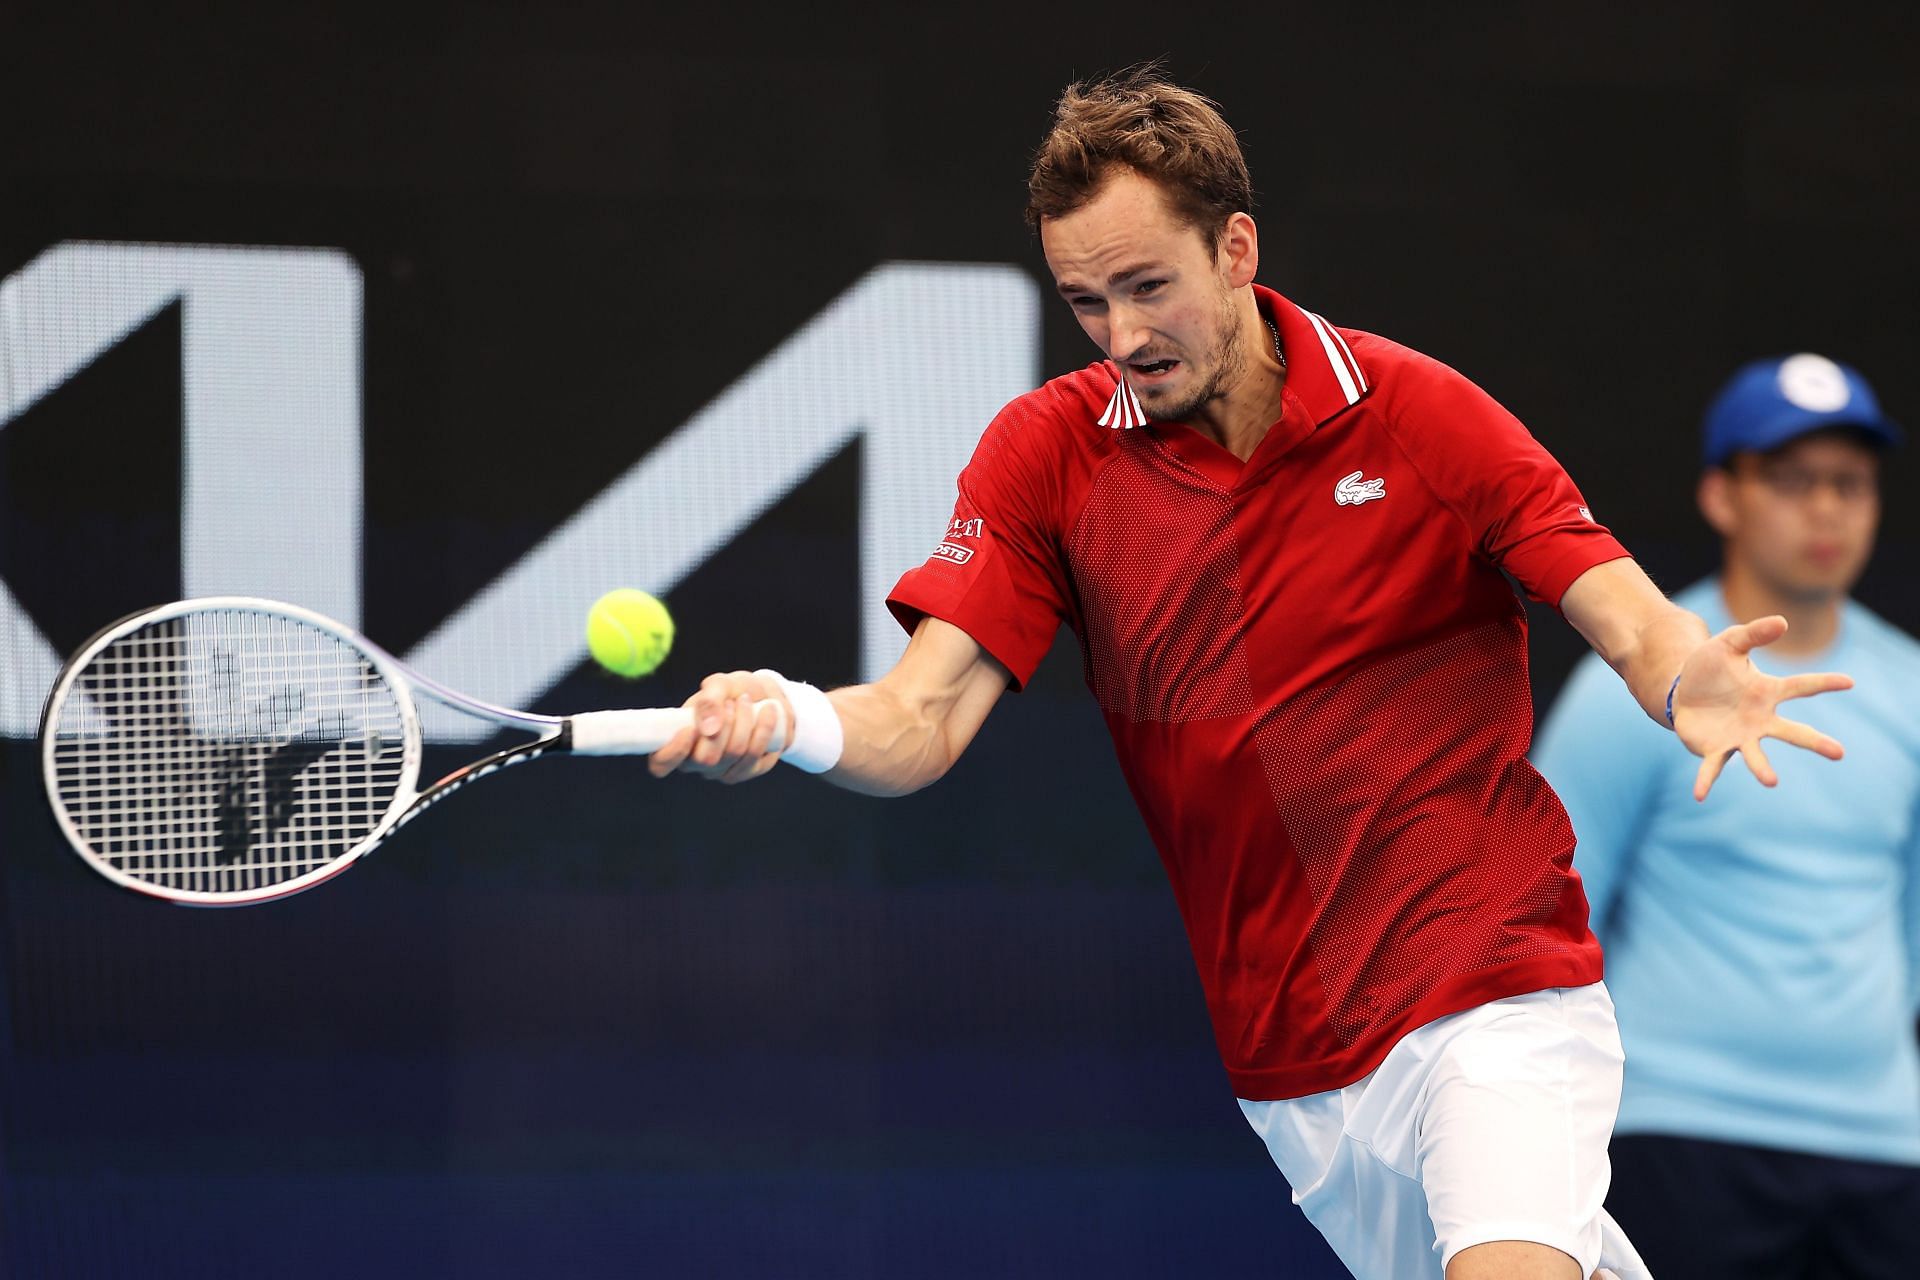 Daniil Medvedev during his match against Ugo Humbert at the 2022 ATP Cup